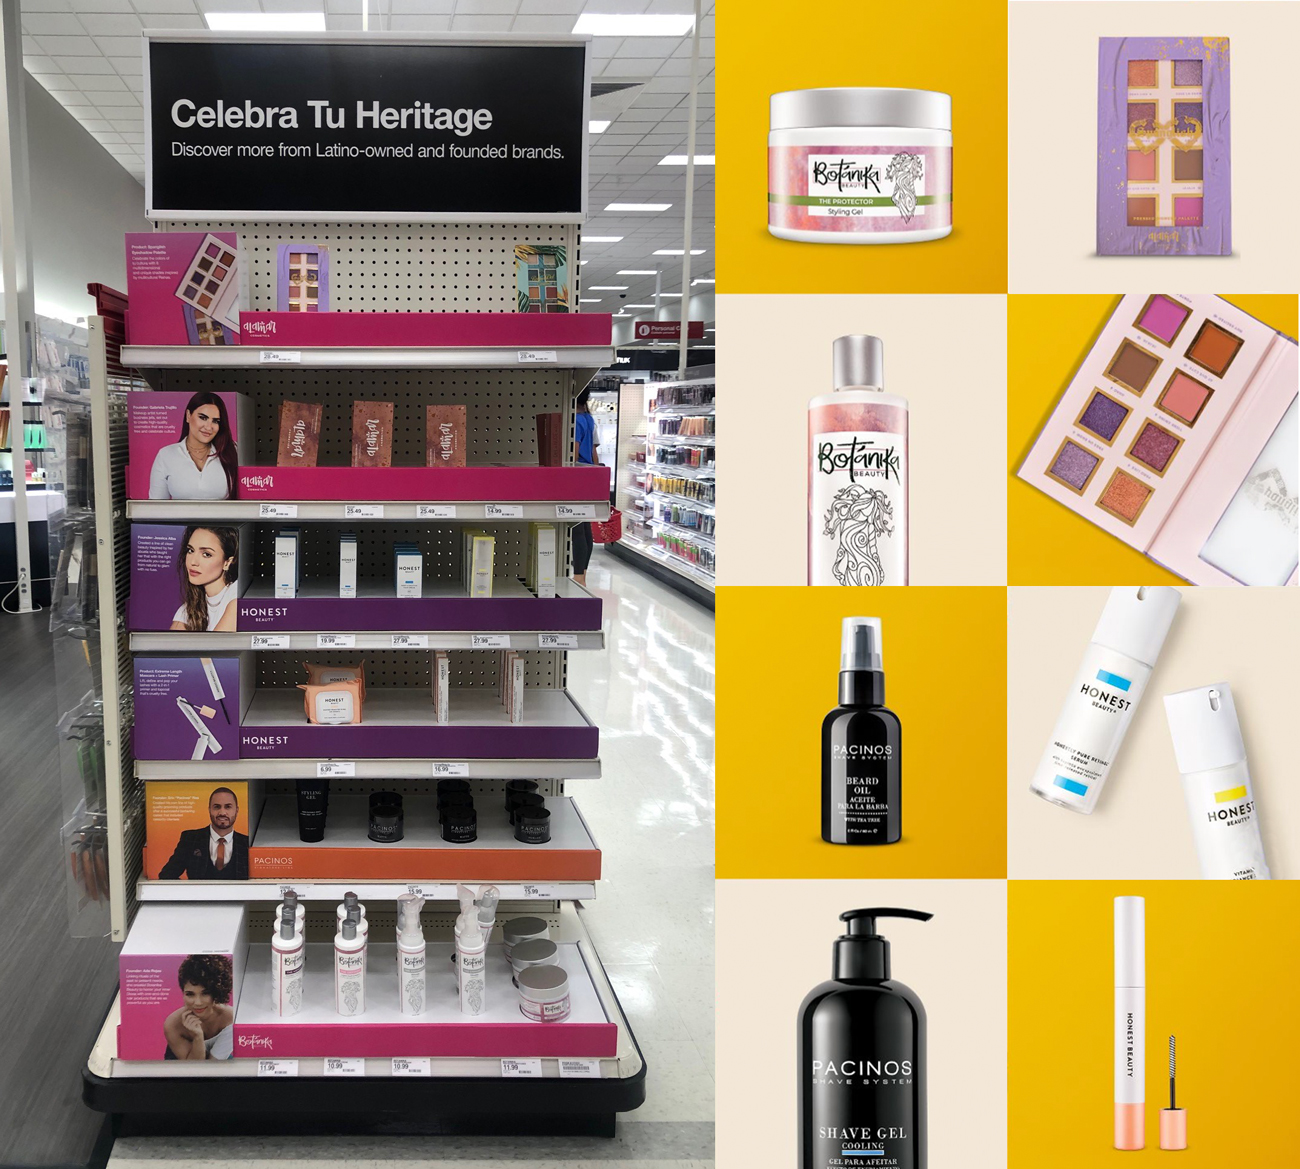 A Target store shelf holds products from Latino-owned businesses and next to it a product collage shows a close-up of packaging for Botanika Beauty and Honest Beauty, eyeshadows from Alamar Cosmetics and product bottles from Pacinos.